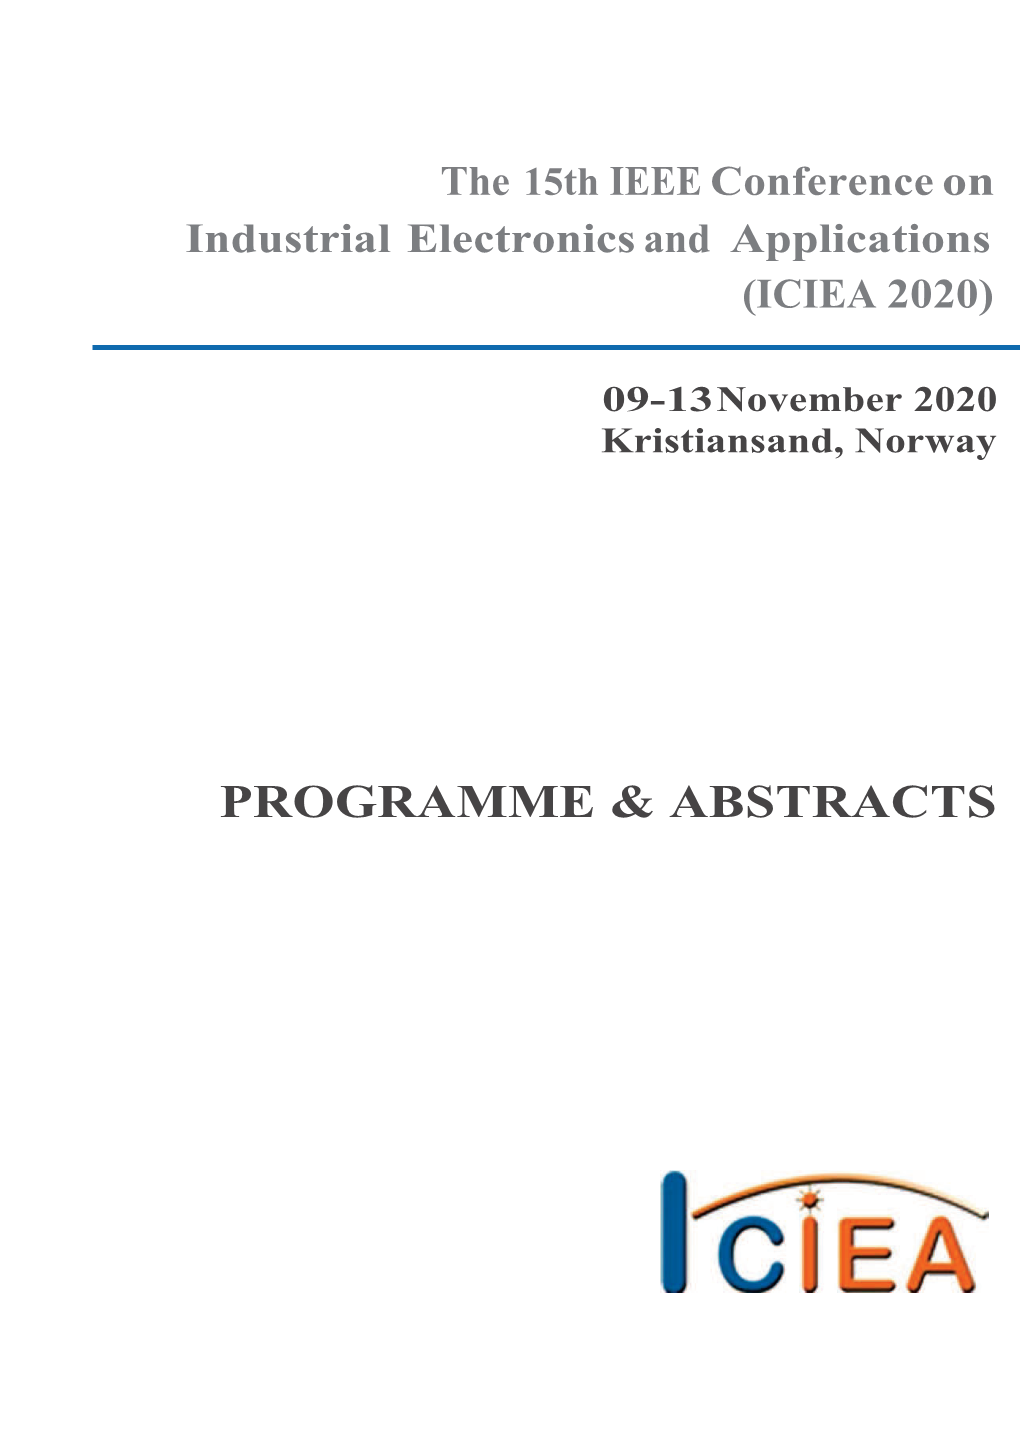 The 15Th IEEE Conference on Industrial Electronics and Applications (ICIEA 2020), 9-13 November 2020, Kristiansand, Norway